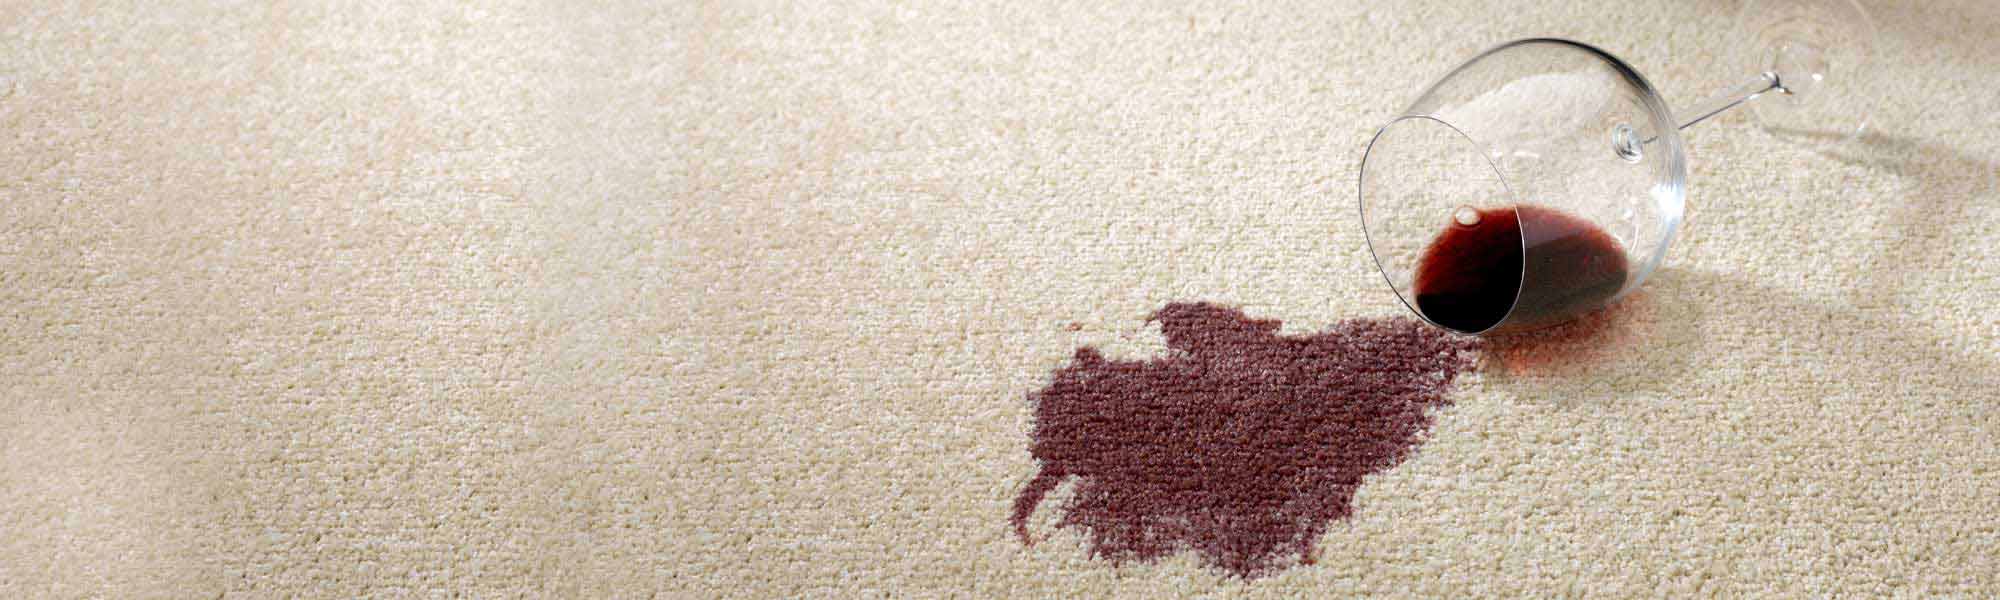 Professional Stain Removal Service by Antietam Chem-Dry